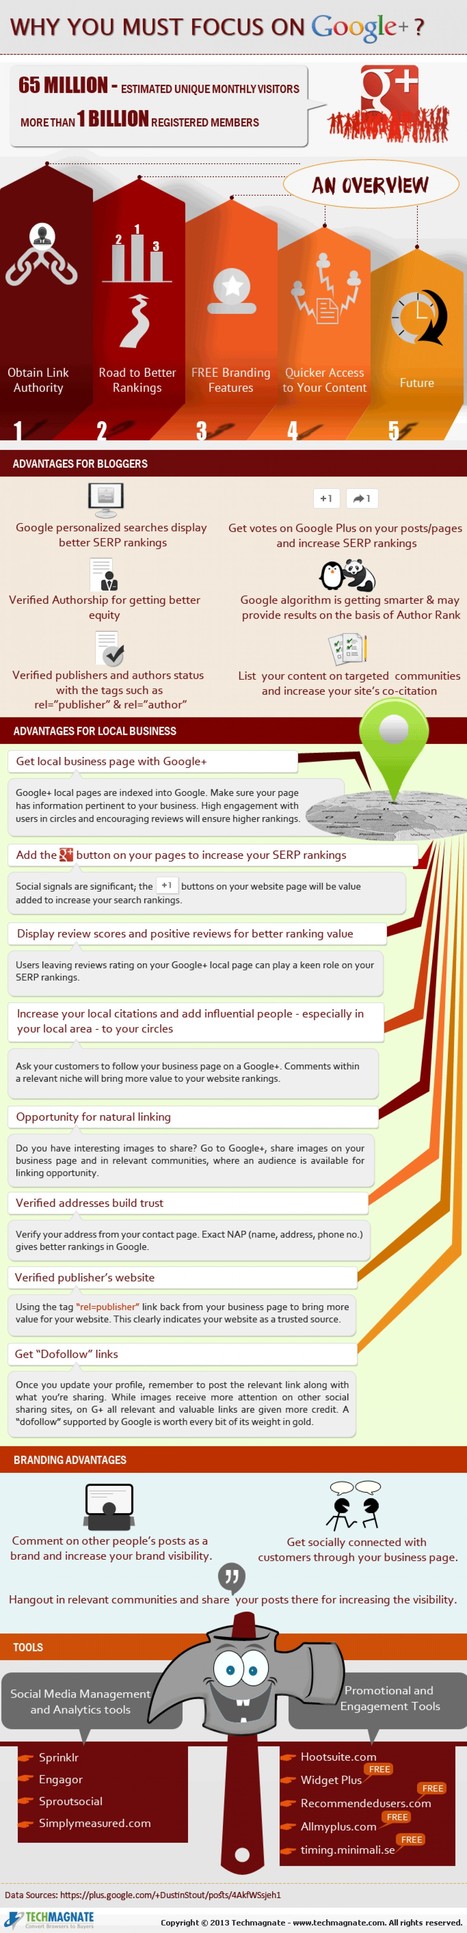 Why you must focus on Google Plus? | Techmagnate | #TheMarketingAutomationAlert | The MarTech Digest | Scoop.it